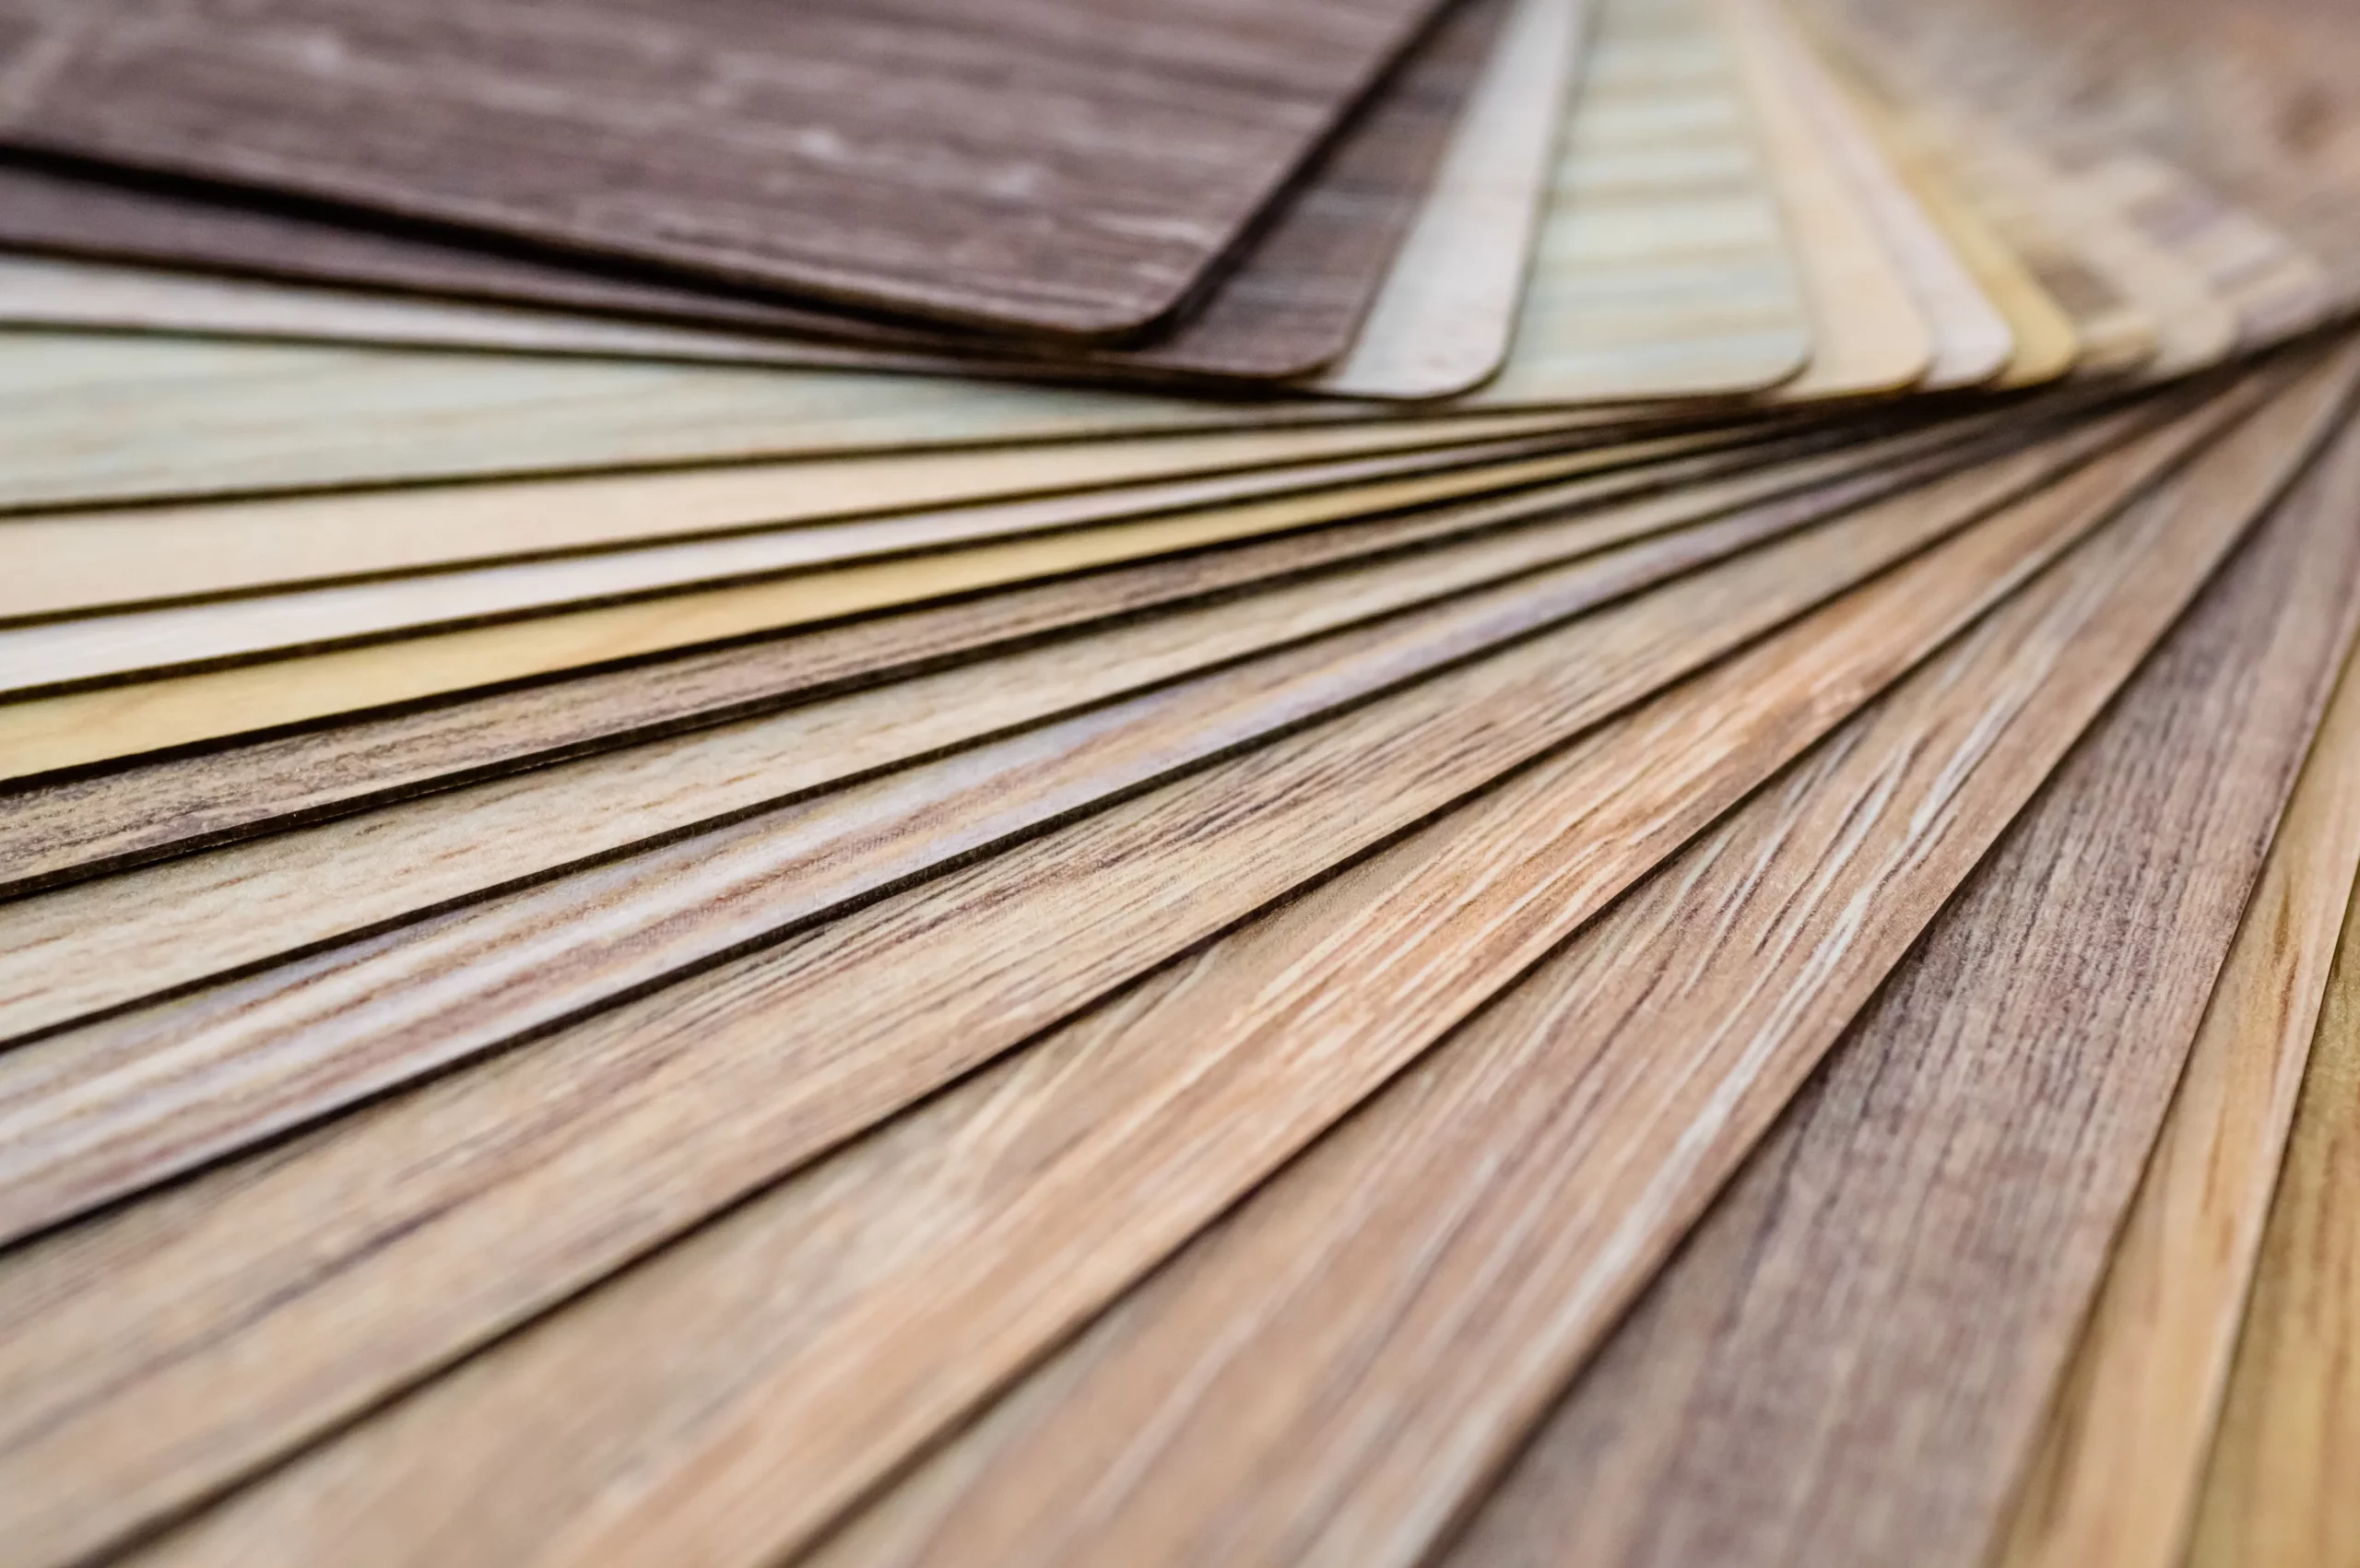 Wooden samples for floor laminate or furniture in home